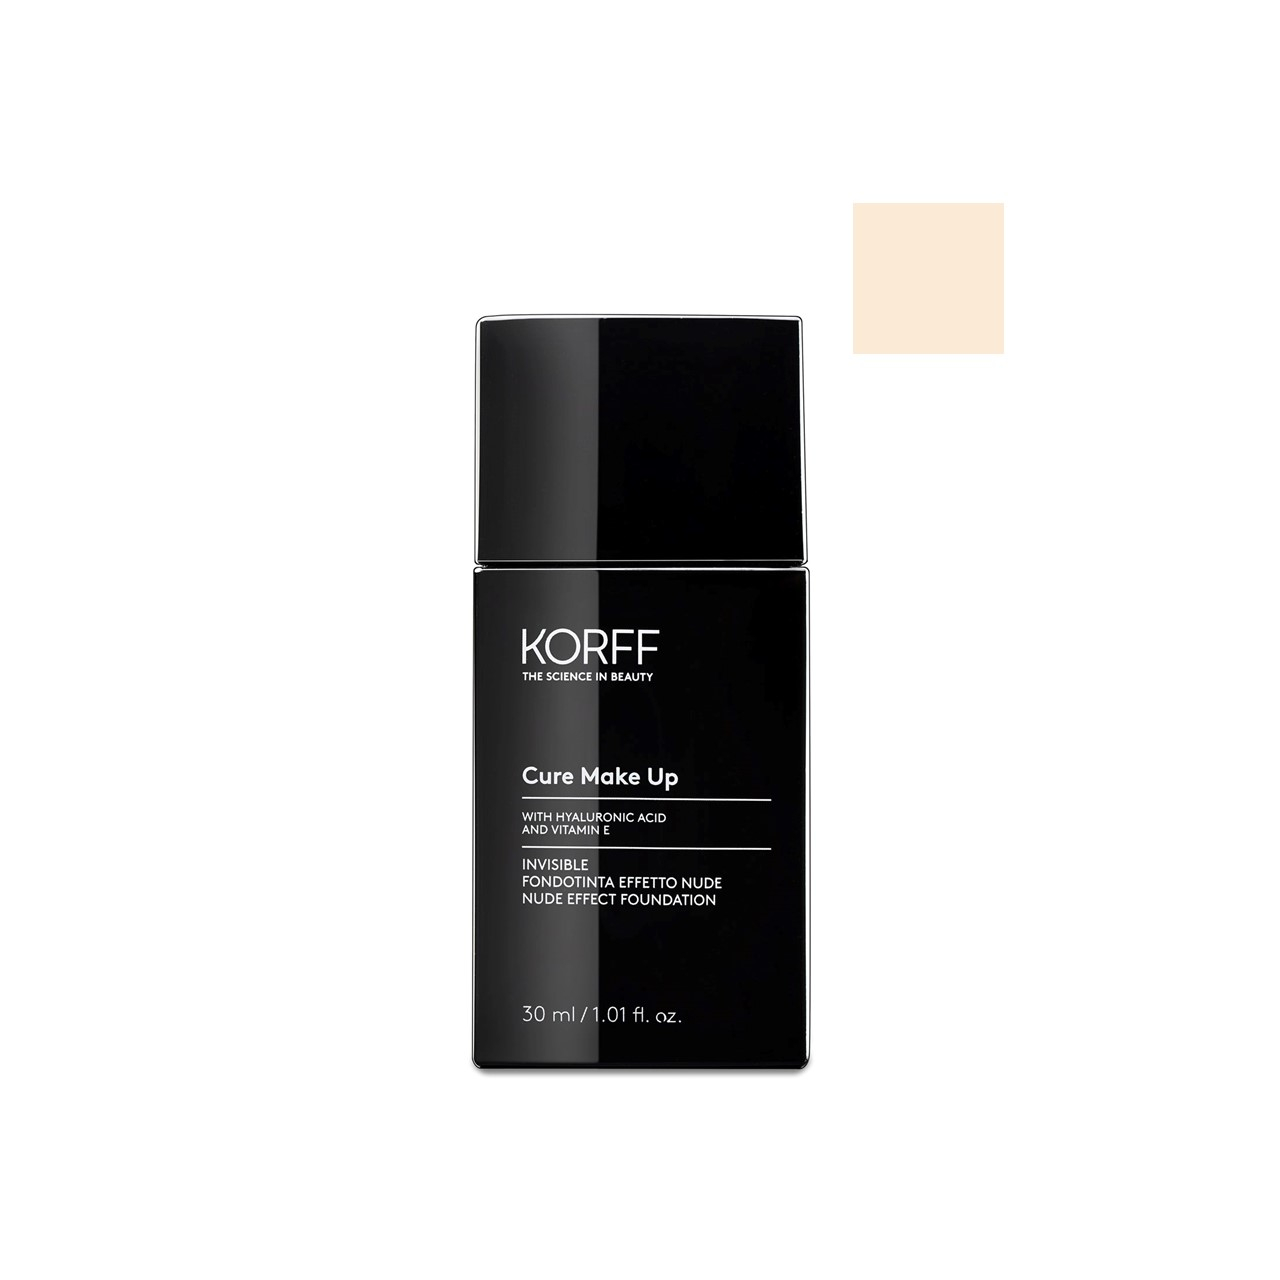 Korff Cure Make-Up Invisible Nude Effect Foundation 01 30ml